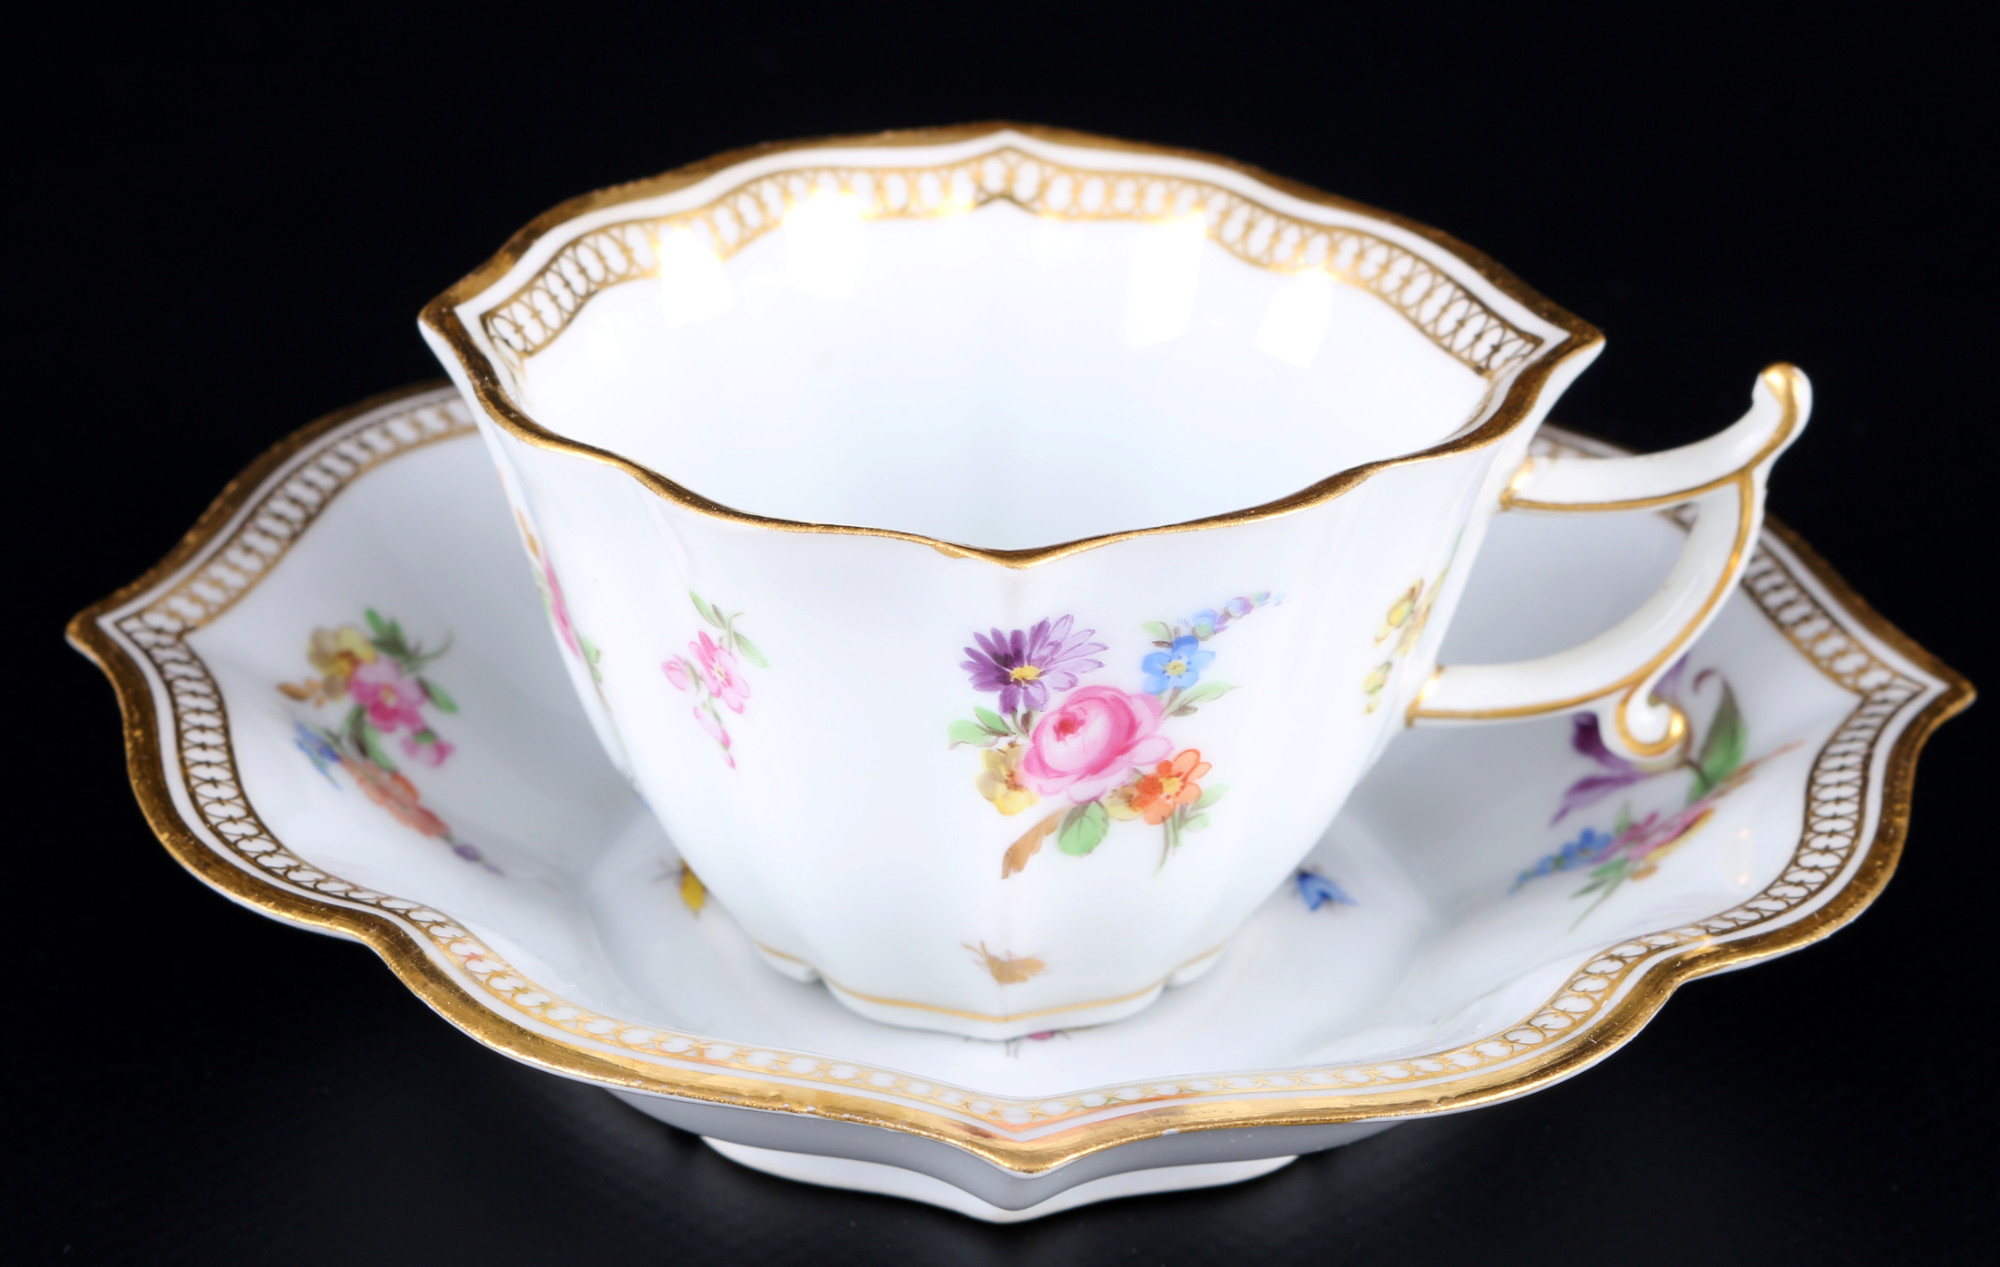 Meissen Flower Bouquet with Galleryborder 2 mocha coffee cups with saucers 1st choice, knob mark, Mo - Image 2 of 3